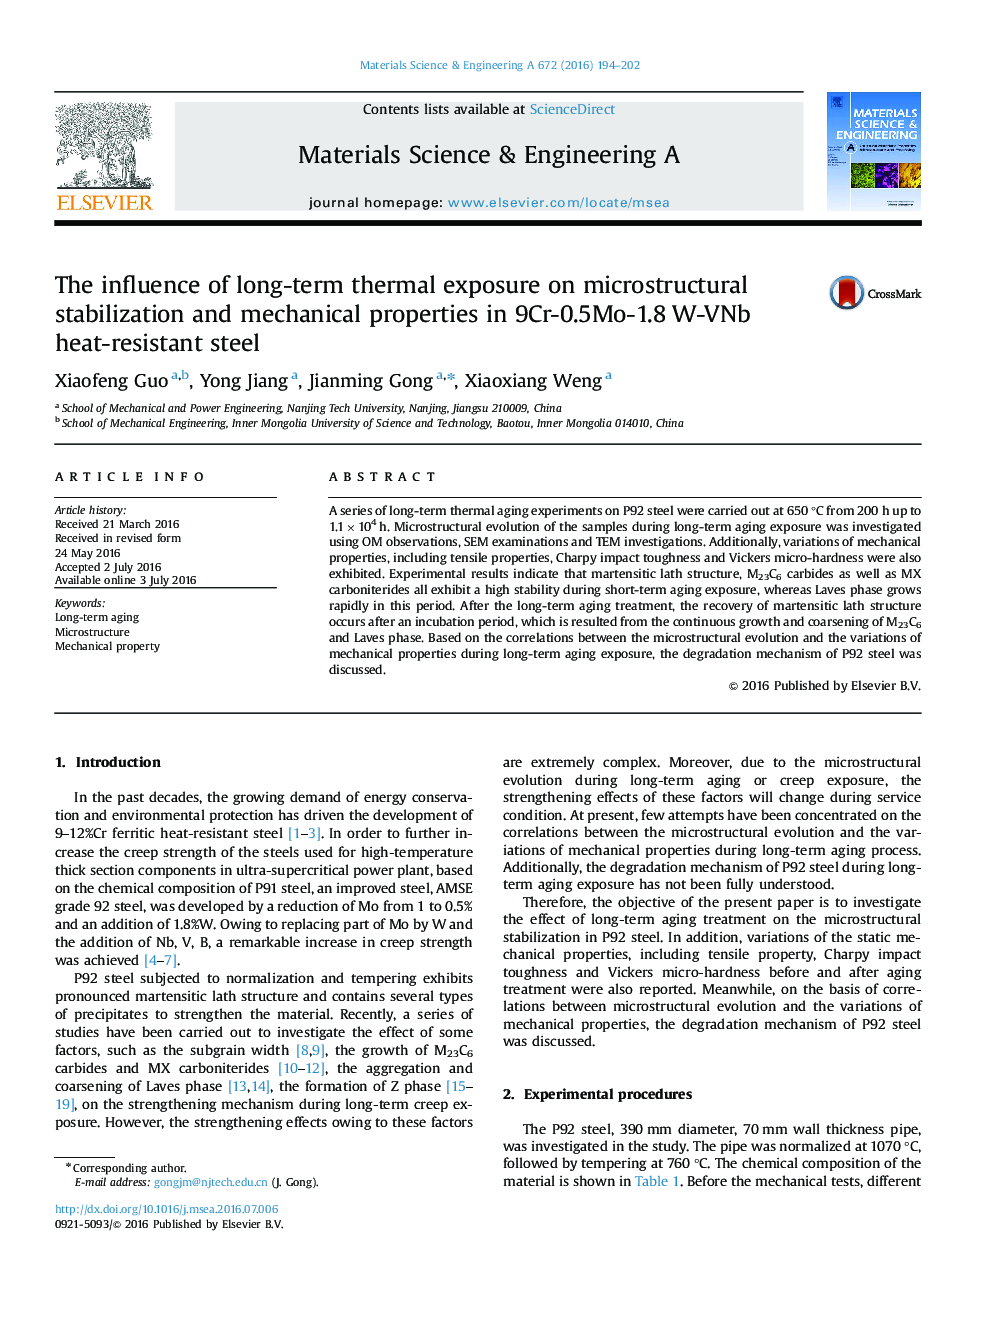 The influence of long-term thermal exposure on microstructural stabilization and mechanical properties in 9Cr-0.5Mo-1.8Â W-VNb heat-resistant steel